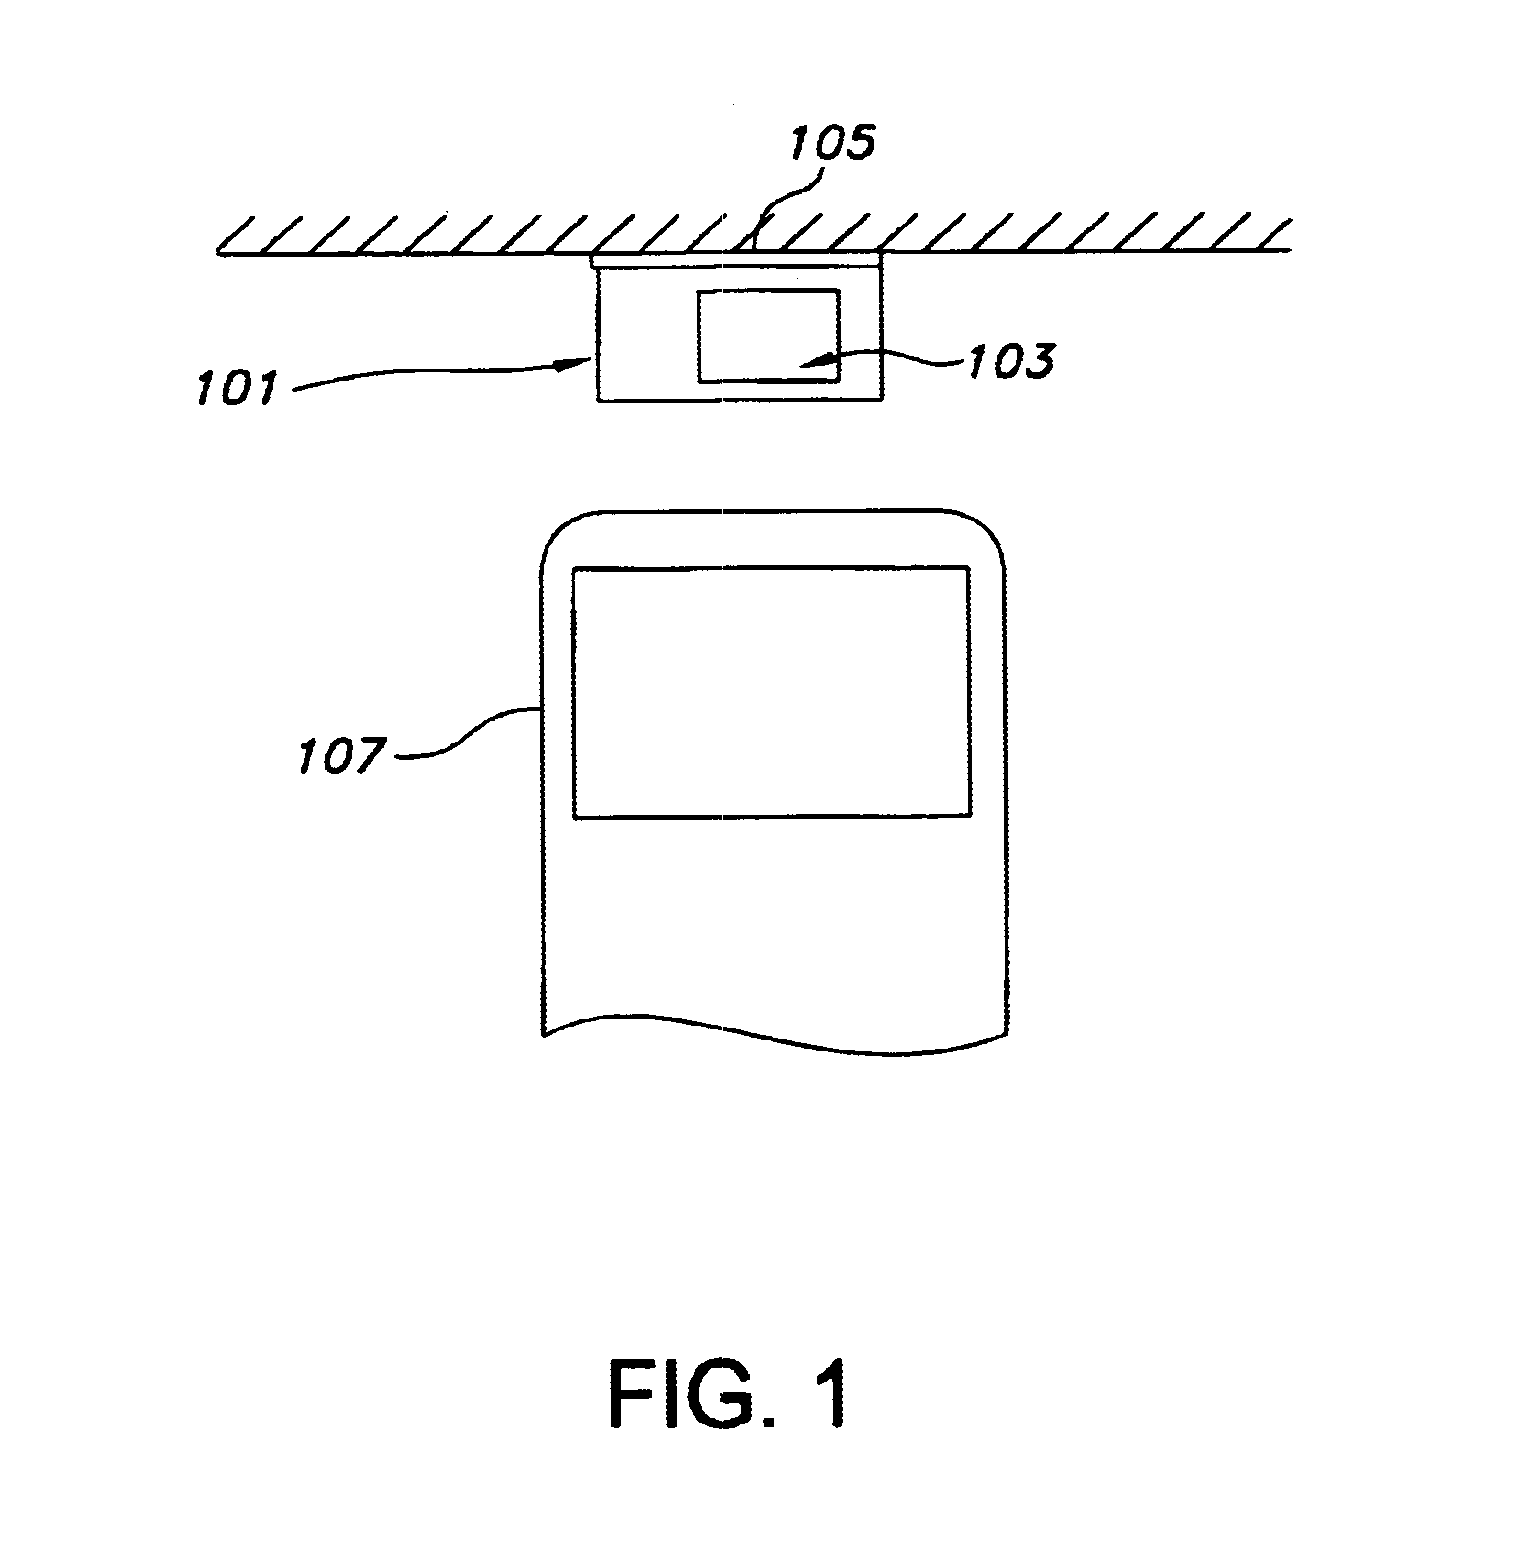 System and method for test data reporting using a status signal